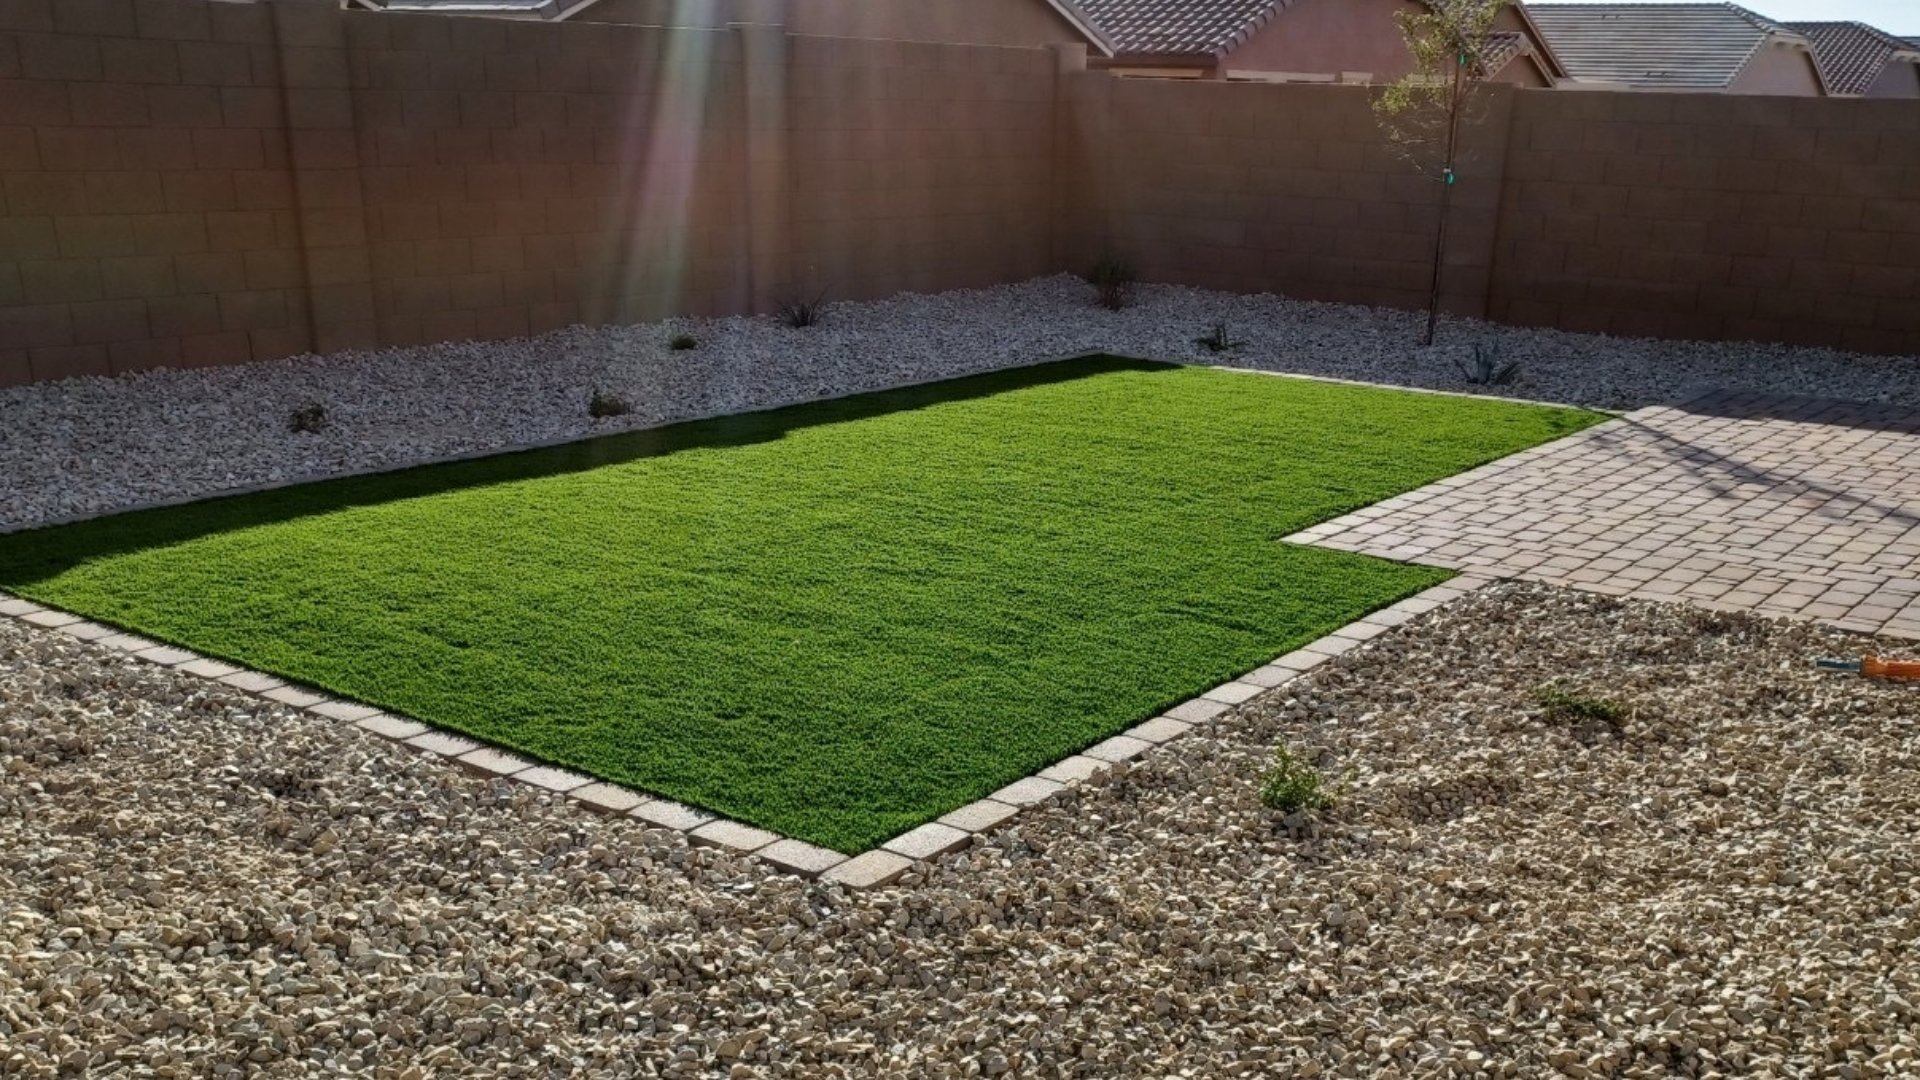 Is Artificial Turf a Worthwhile Investment?